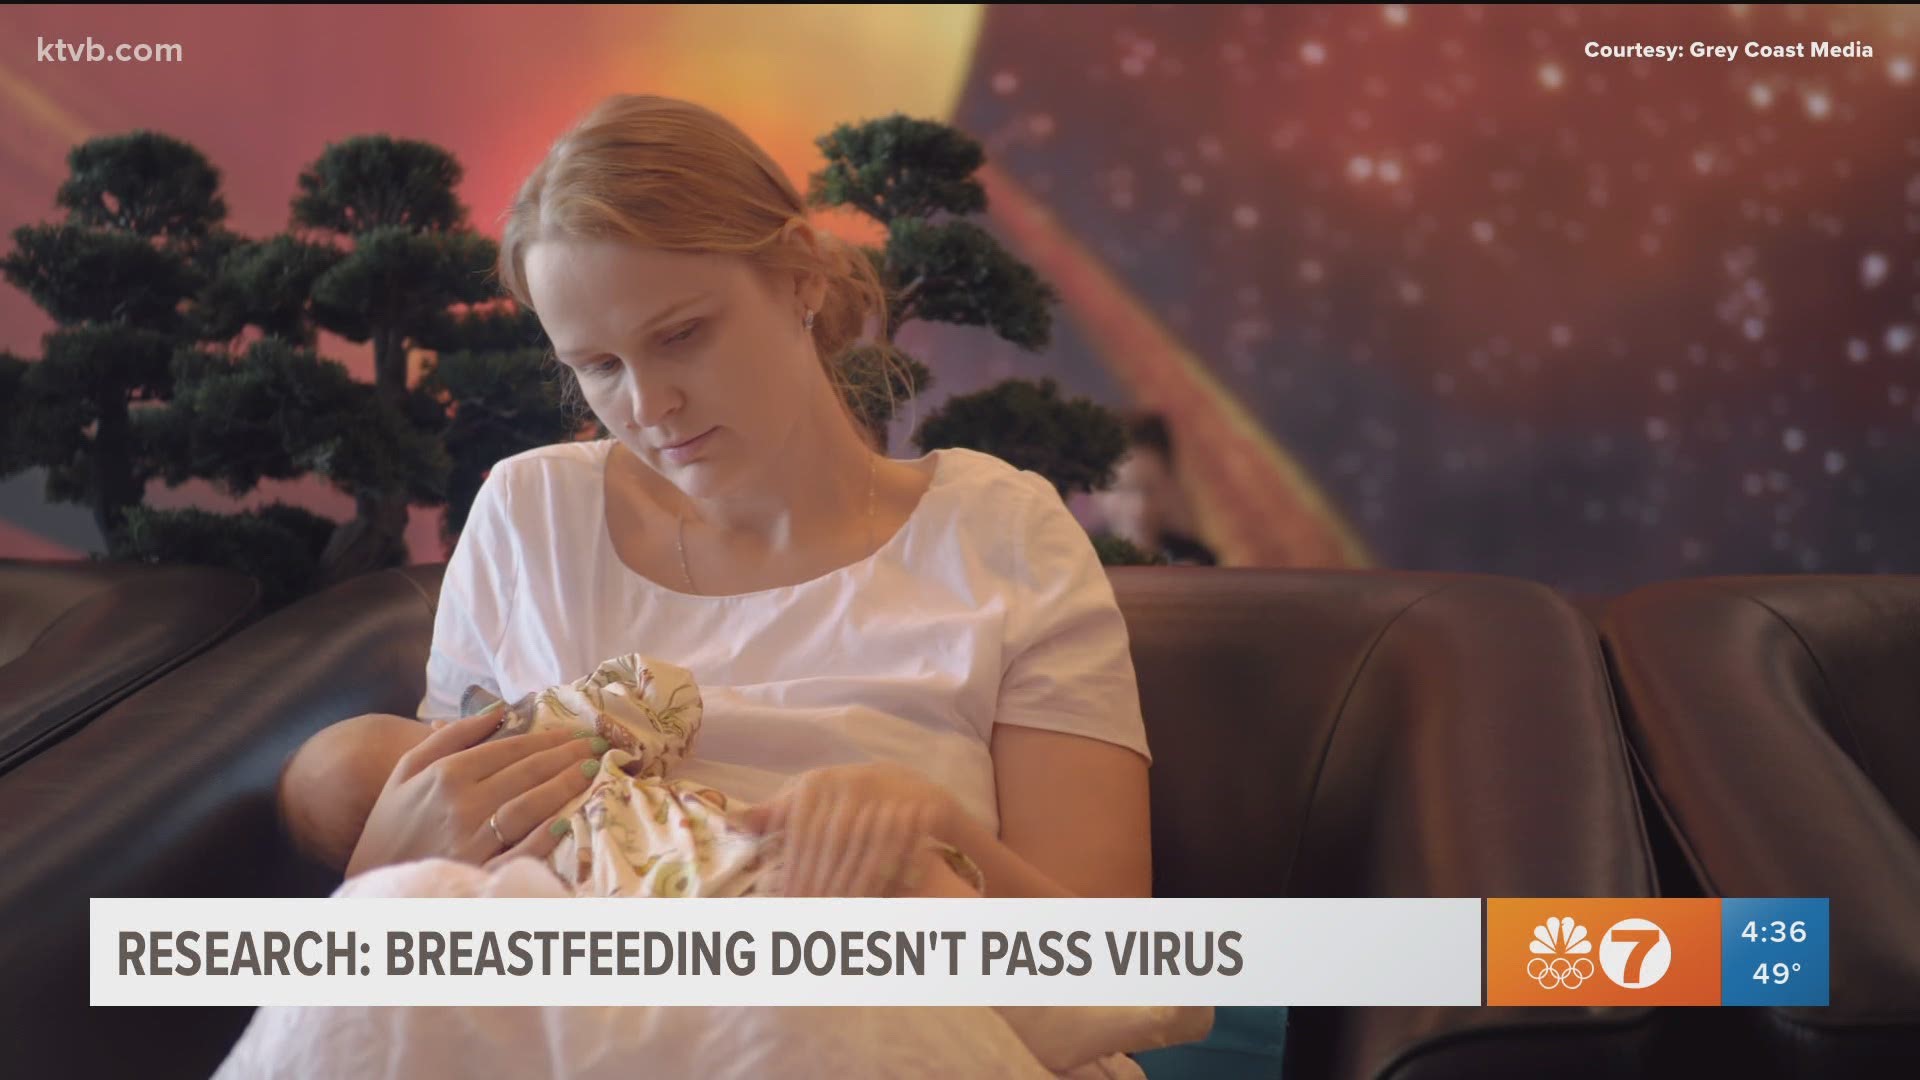 New research shows that breastfeeding women with COVID-19 do not pass along the virus in their milk. Instead, they transfer antibodies that neutralize the virus.